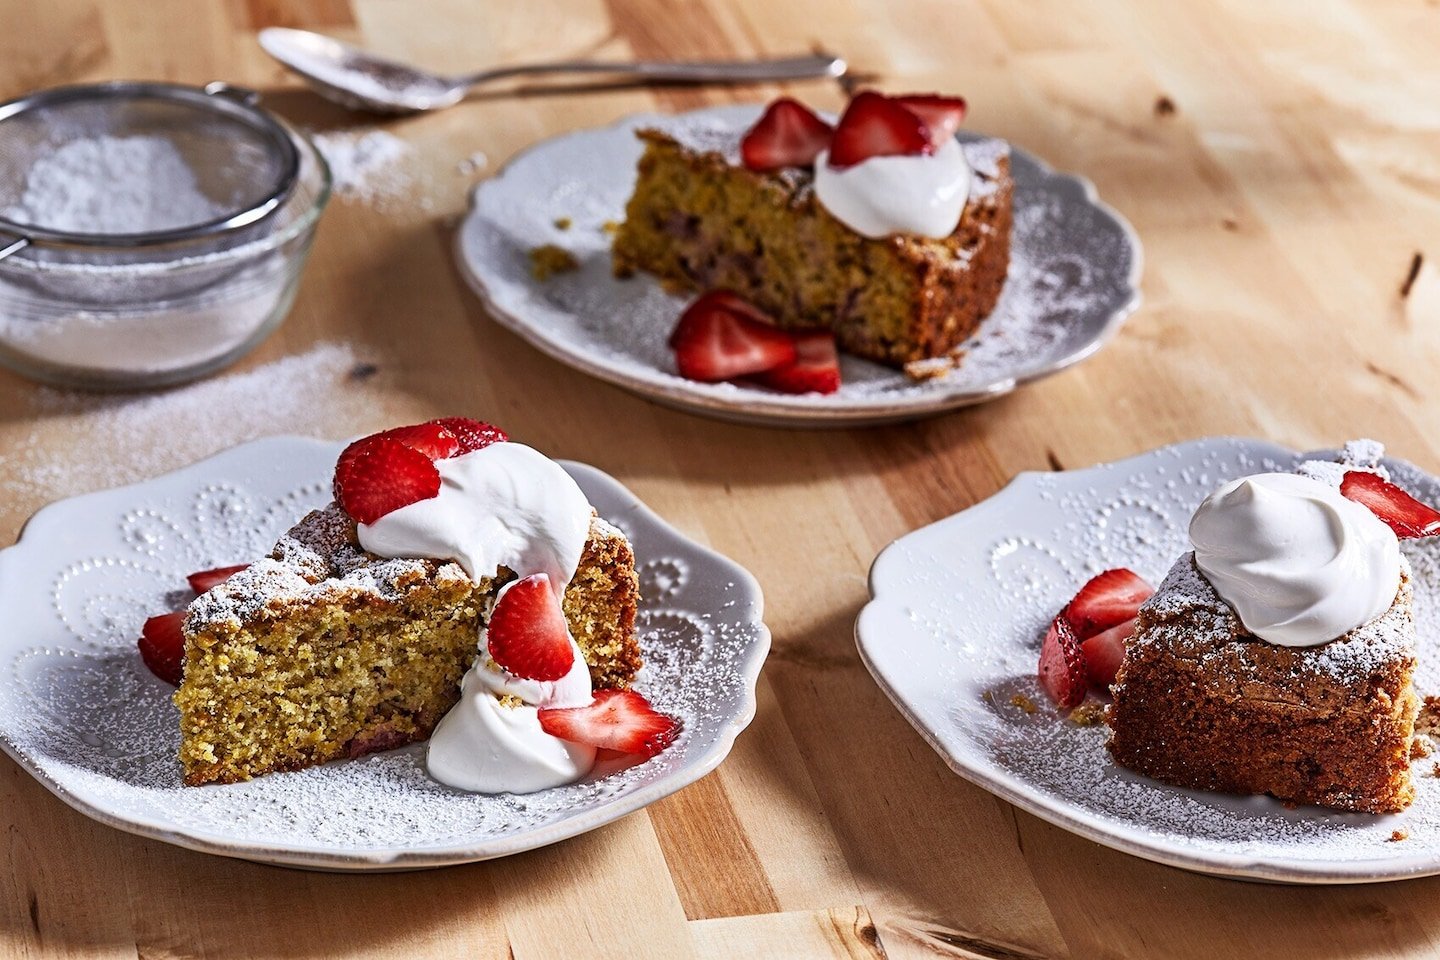 With their powers combined, strawberries, pistachios and olive oil make for one splendid cake